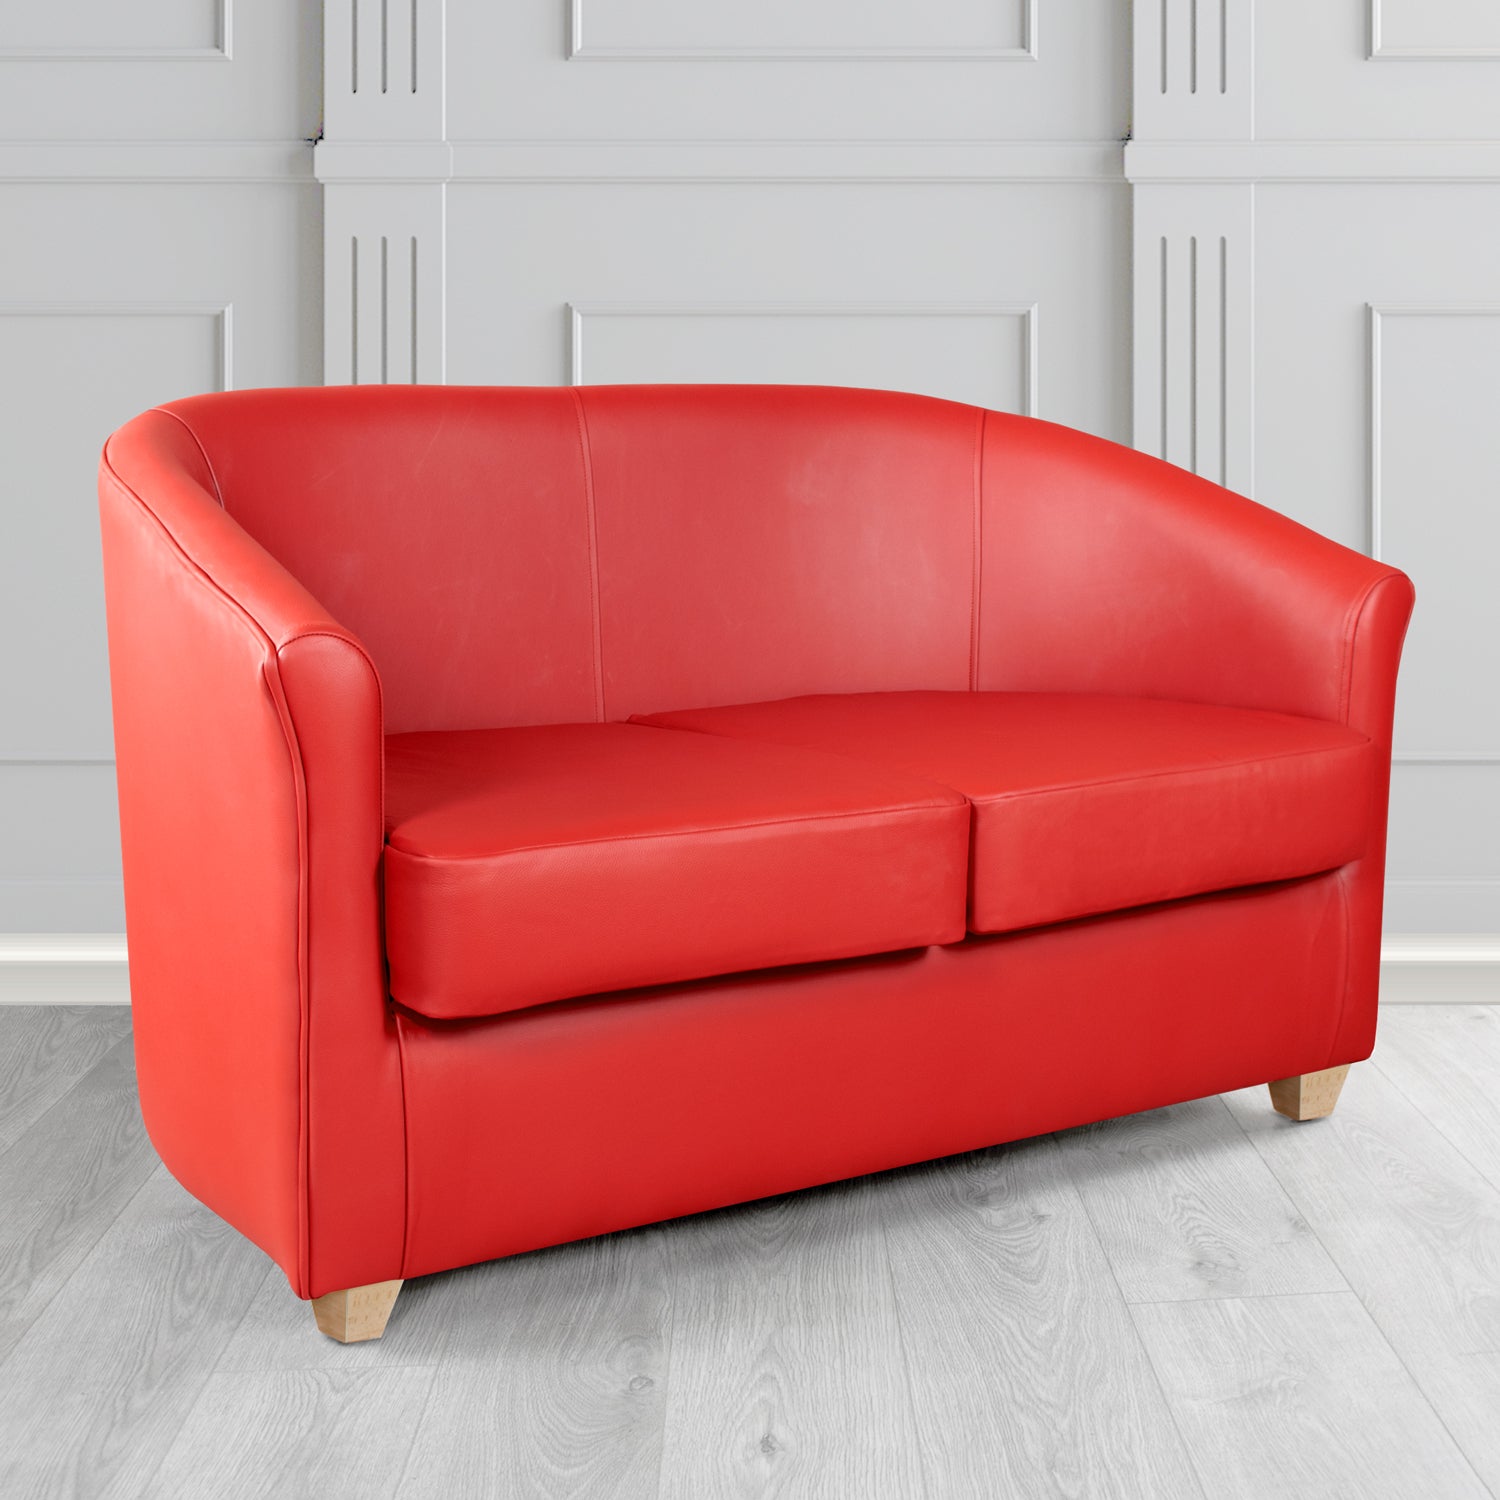 Cannes 2 Seater Tub Sofa in Madrid Rouge Faux Leather - The Tub Chair Shop